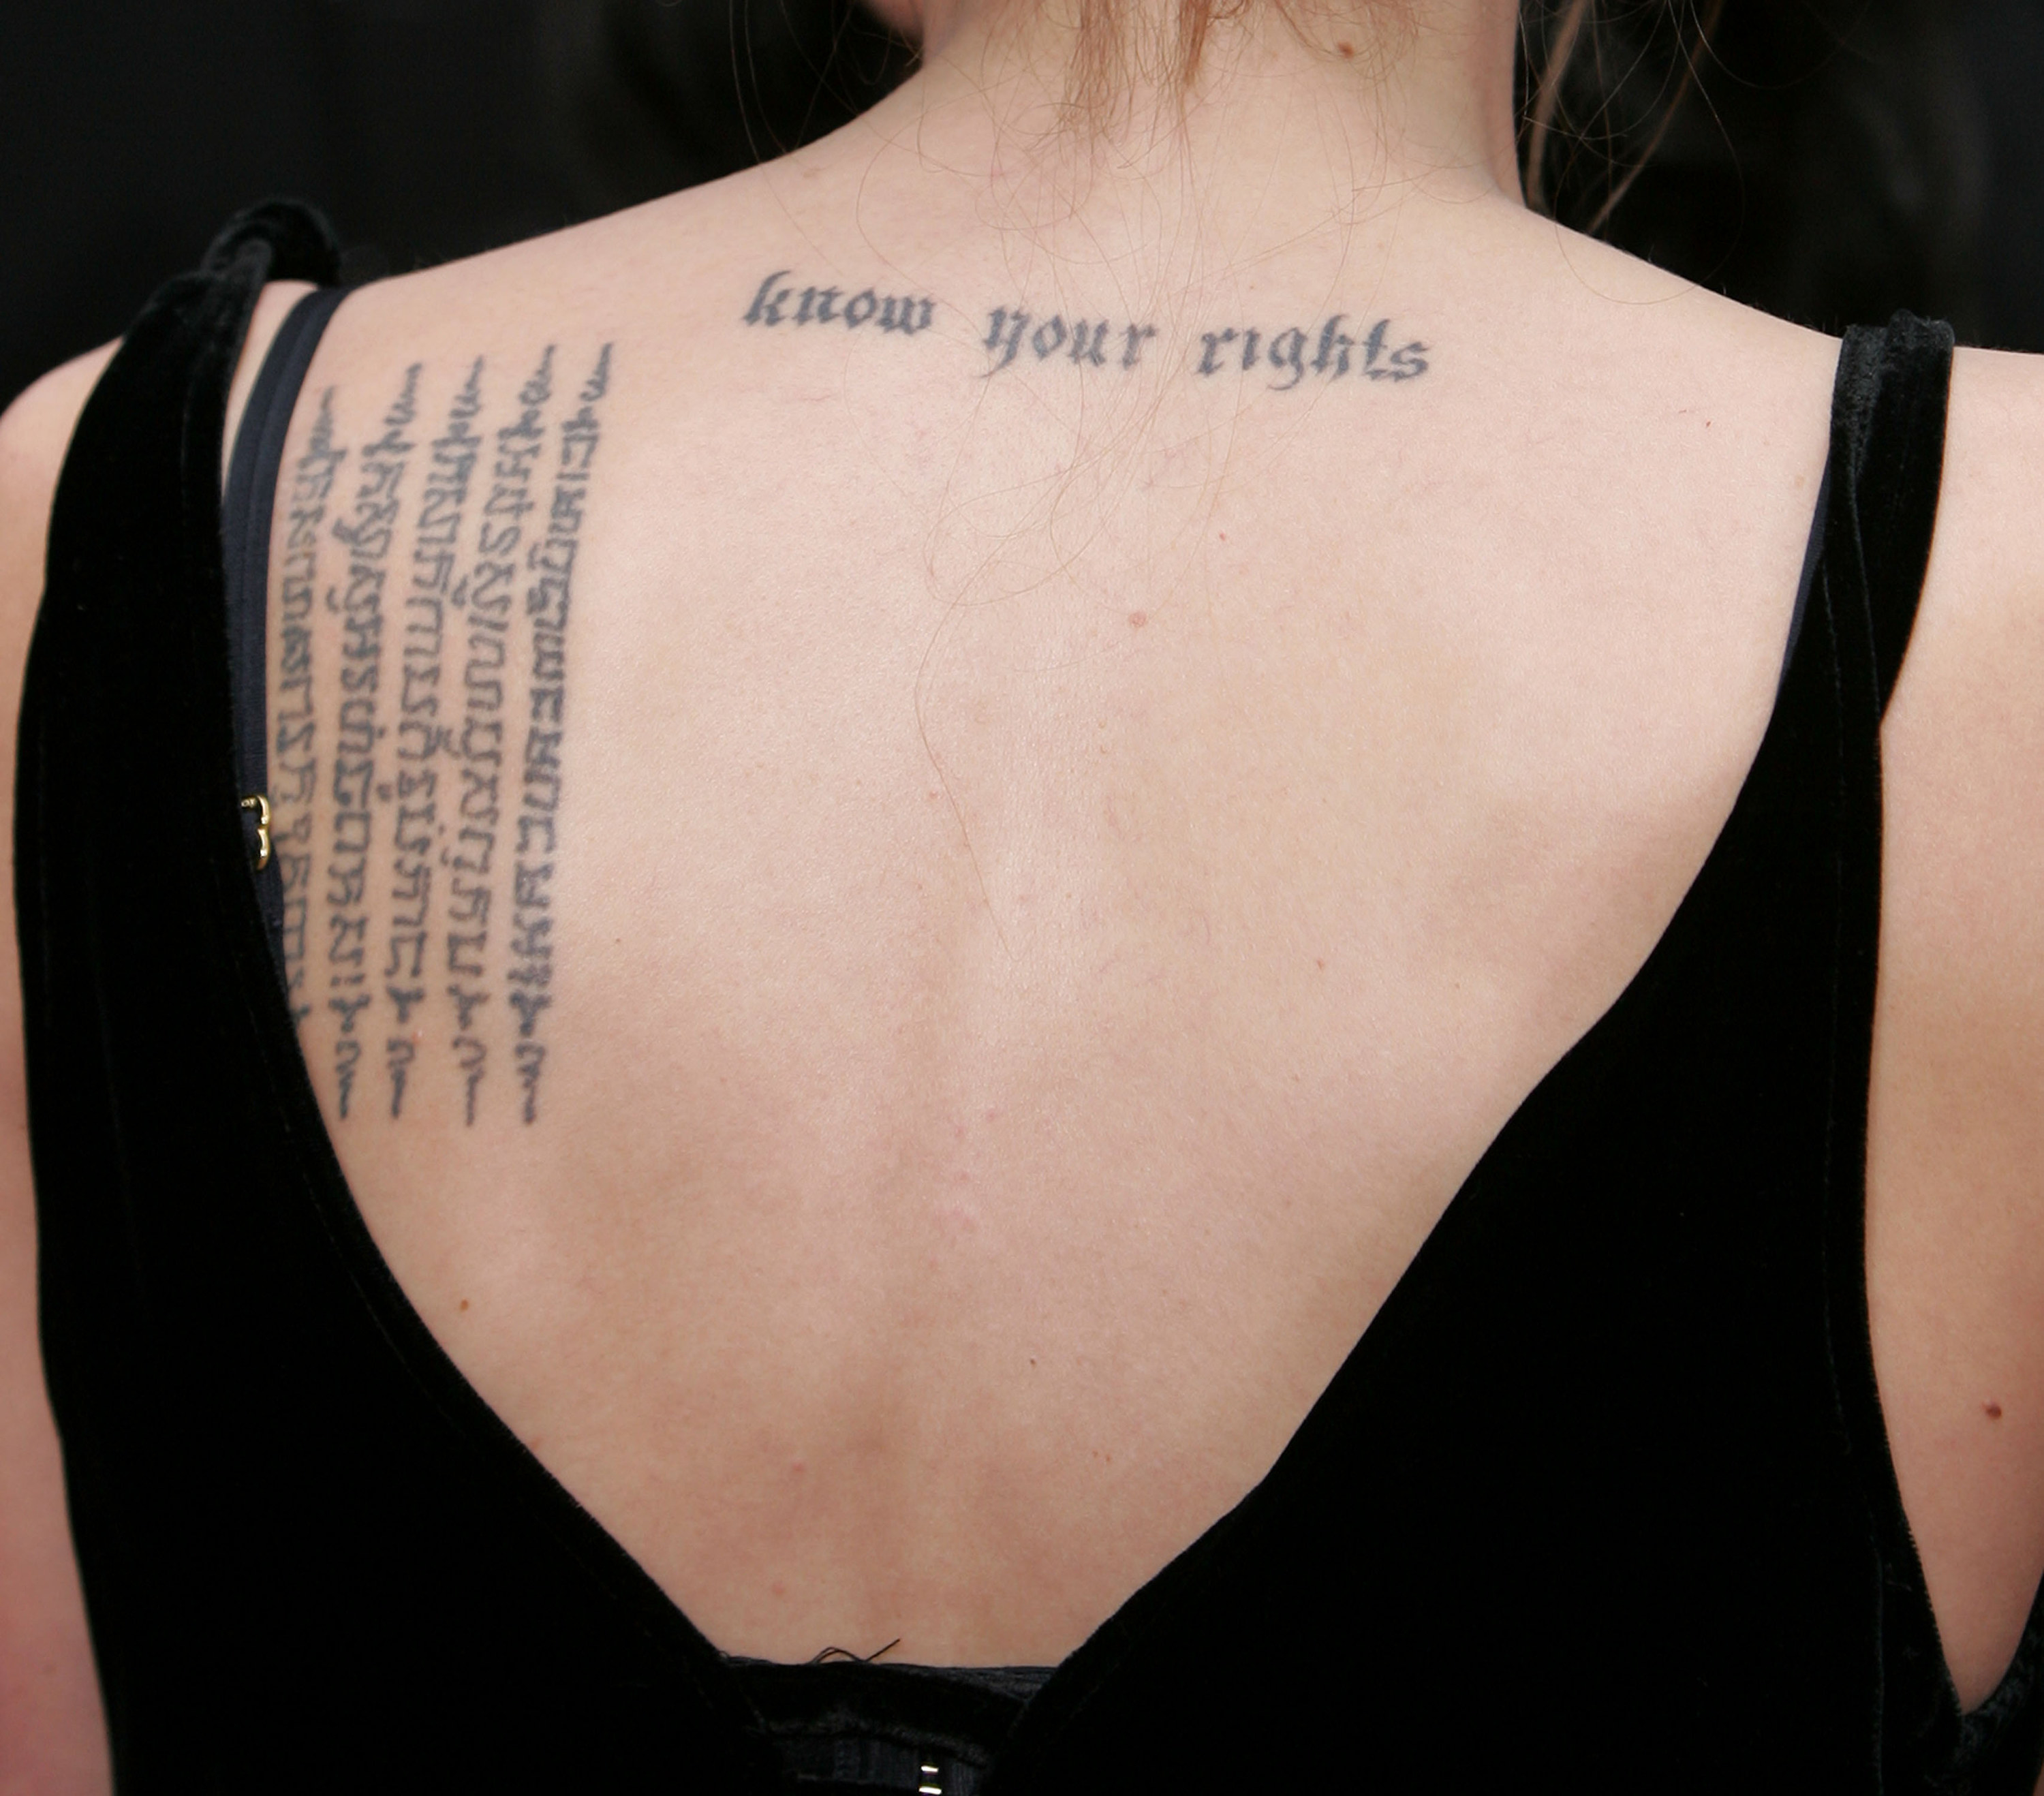 &quot;Know your rights&quot; on her back near the nape of her neck